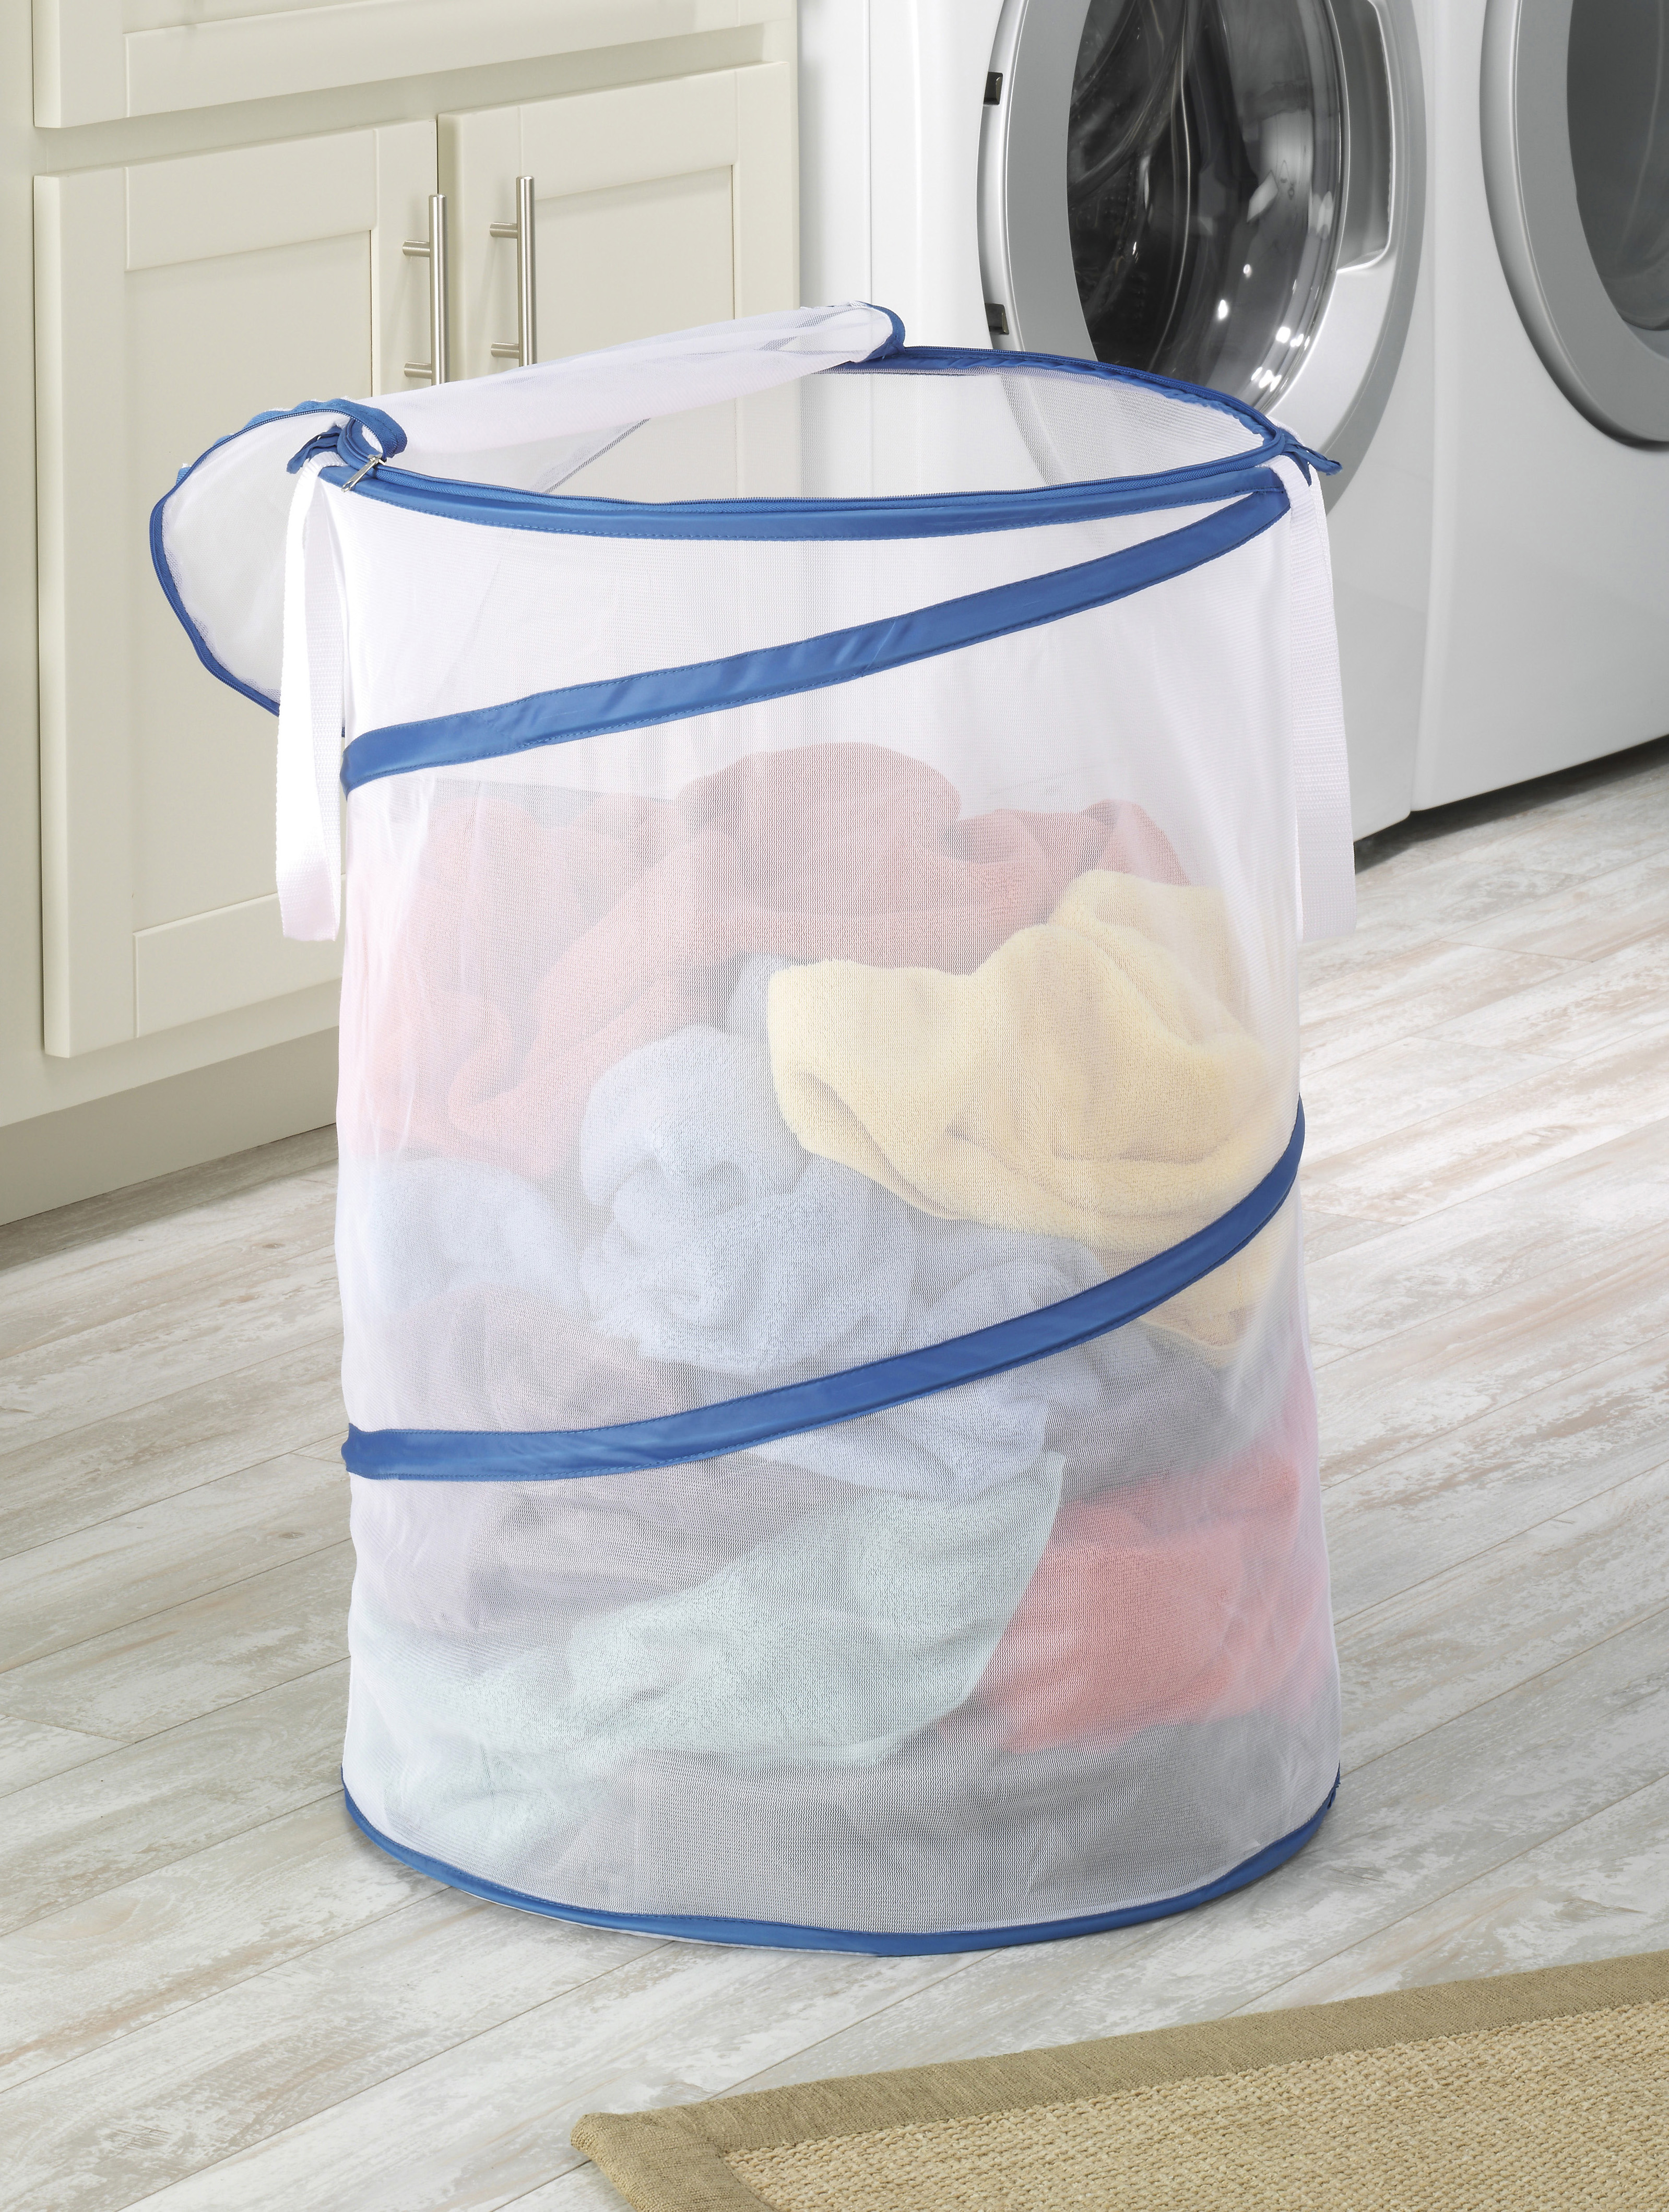 Whitmor Zippered Collapsible Laundry Hamper, Blue and White - image 2 of 7